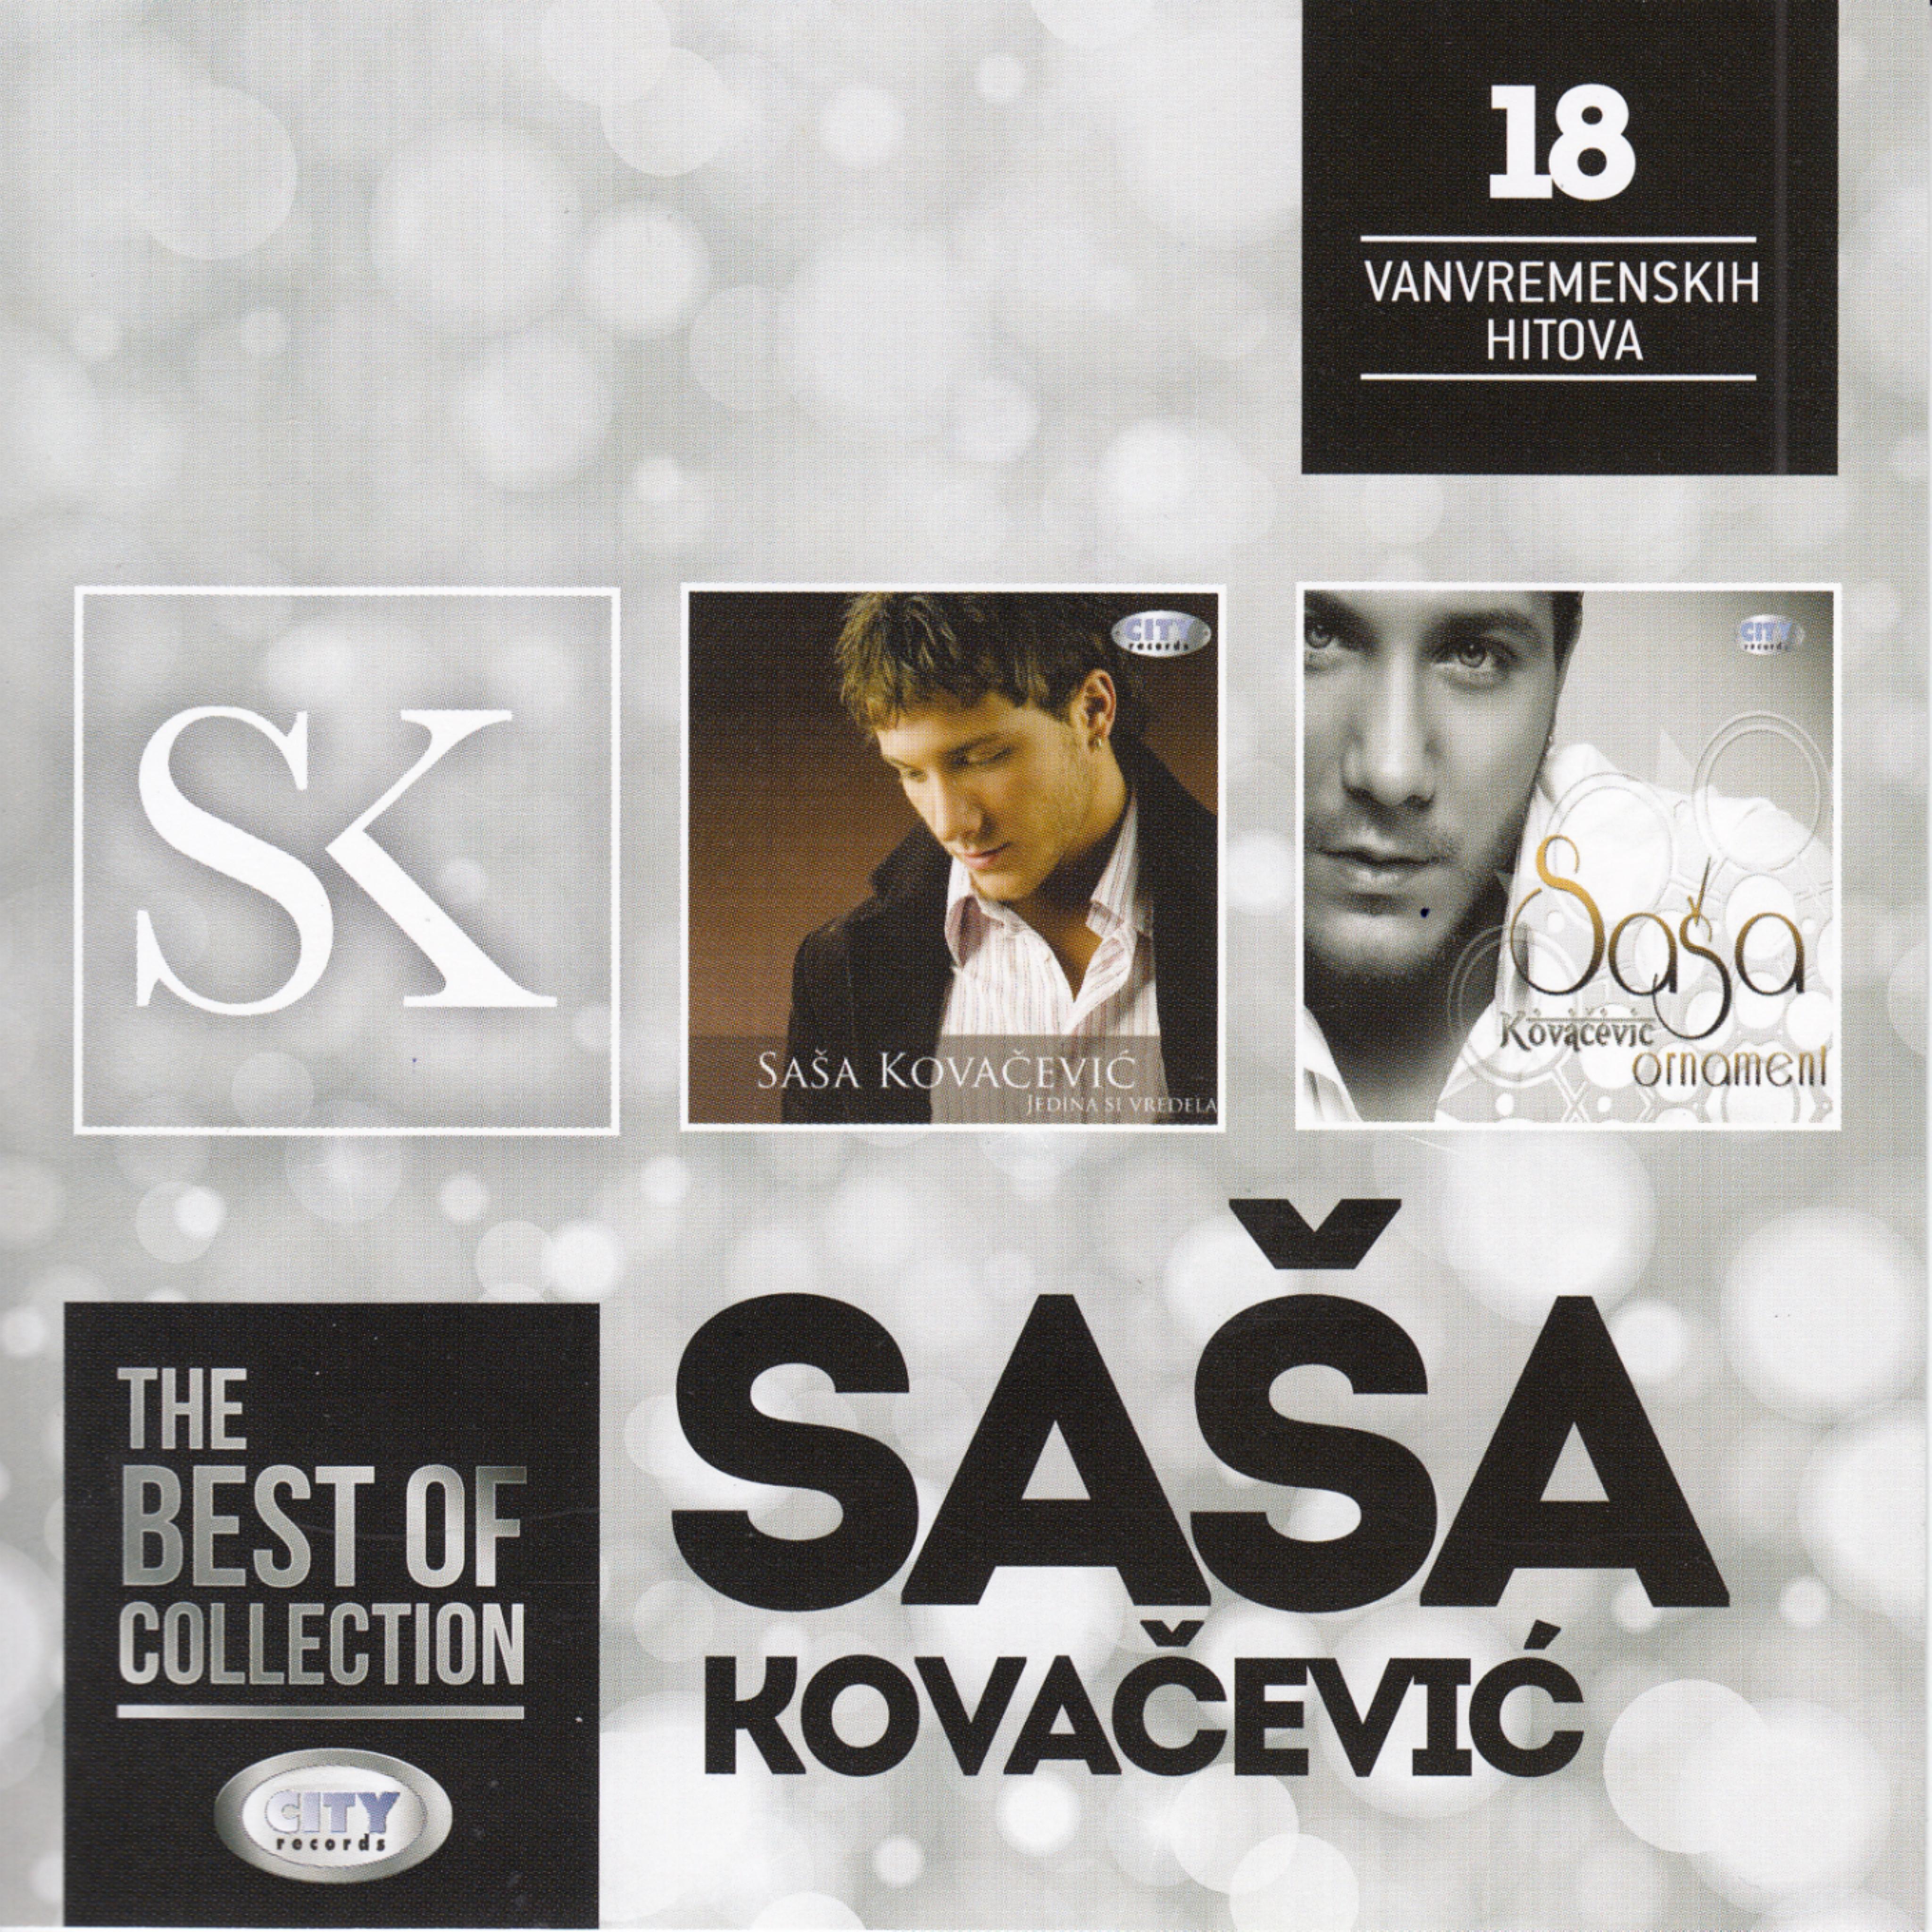 The Best Of Collection Sa a Kova evi